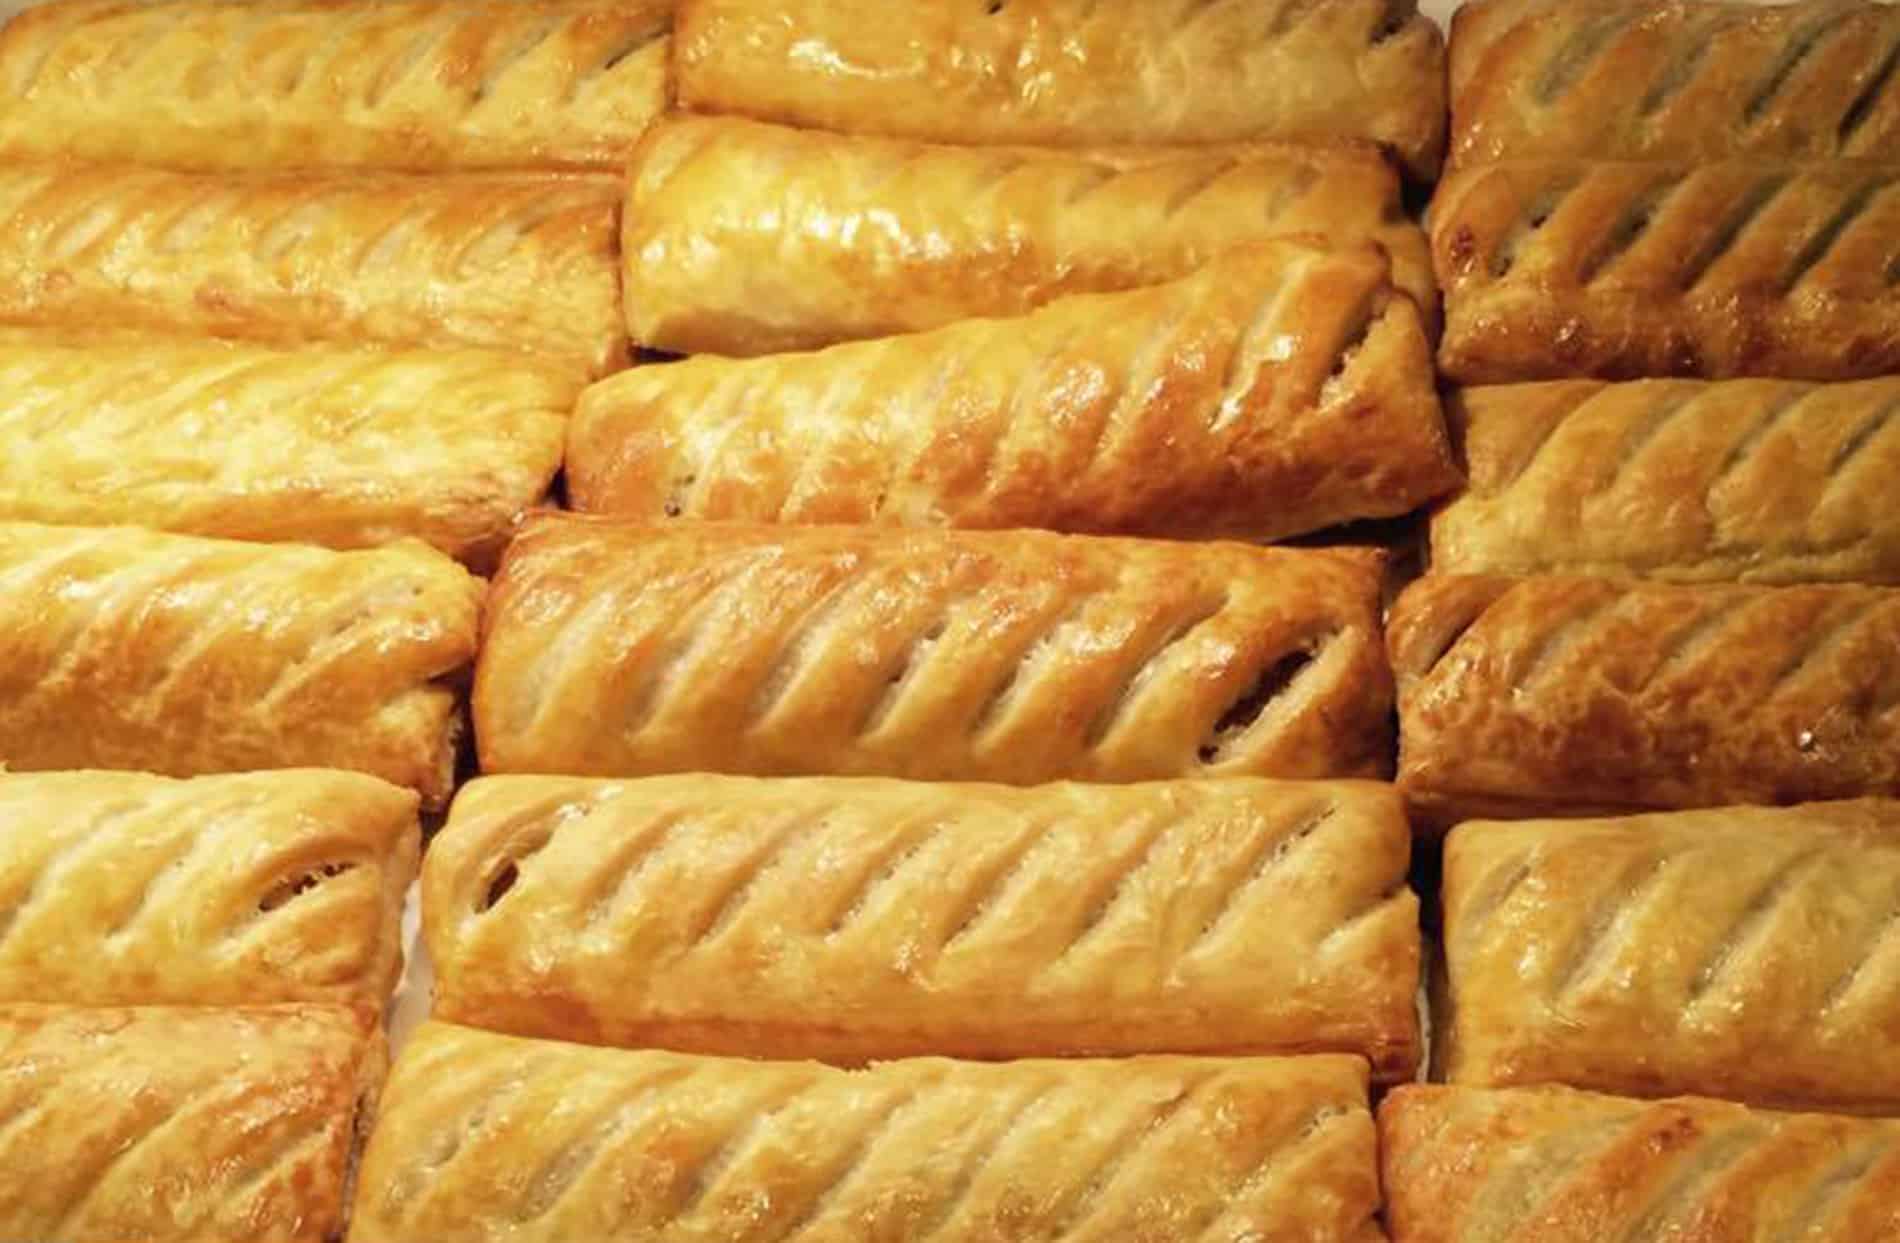 Spectator columnist says people who like Greggs are ‘dillusional’